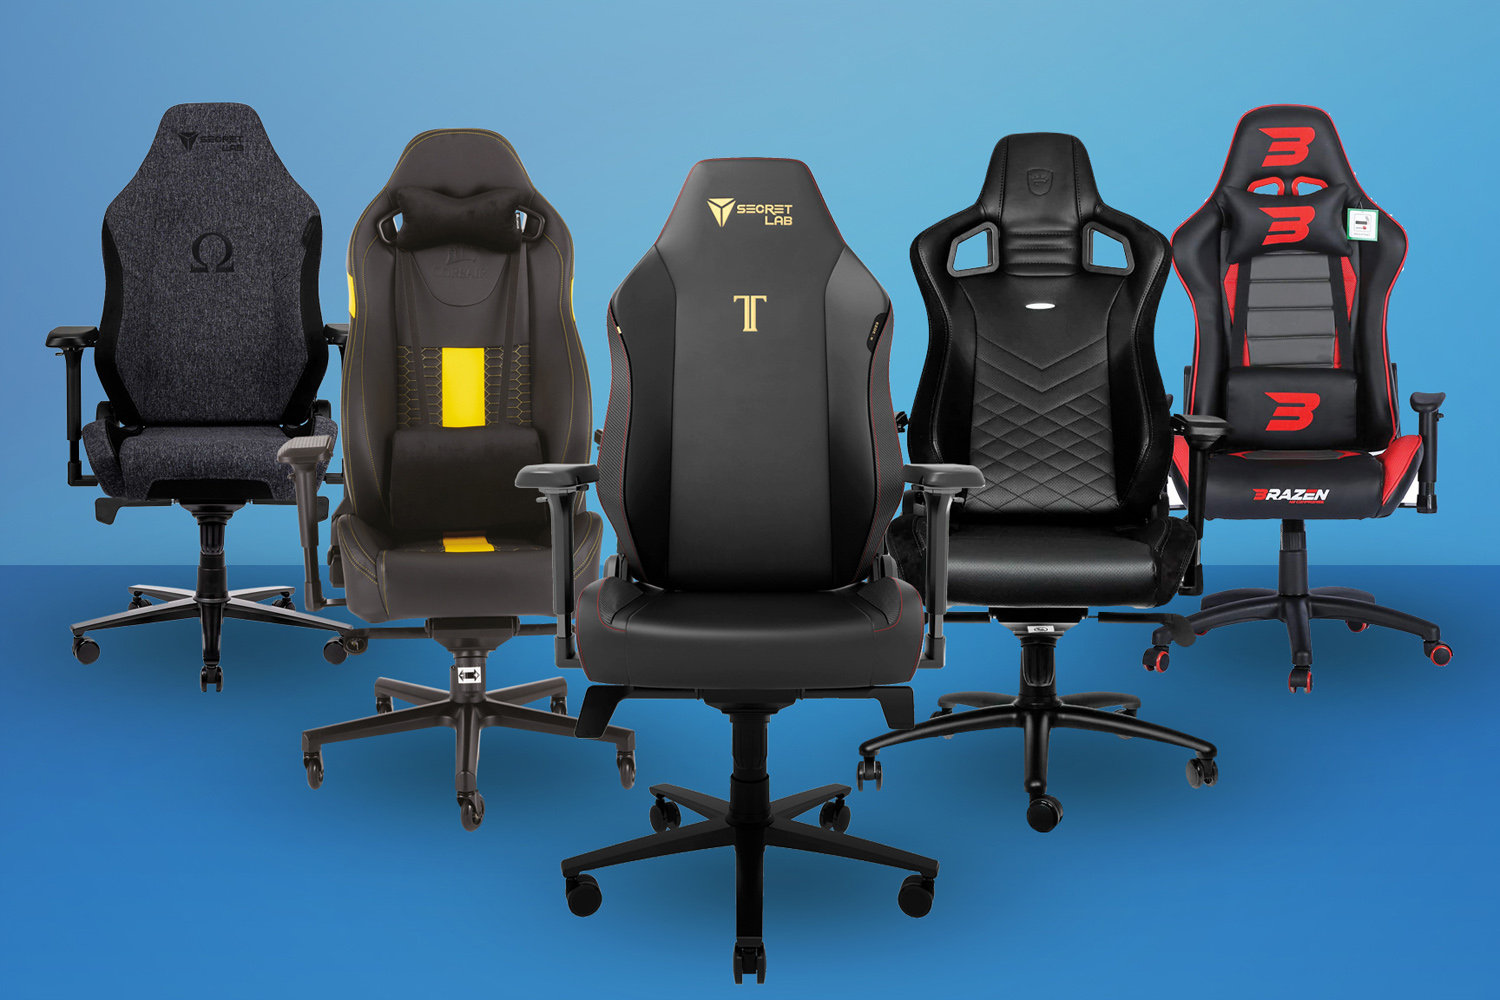 The 5 Best Console Gaming Chairs in 2021